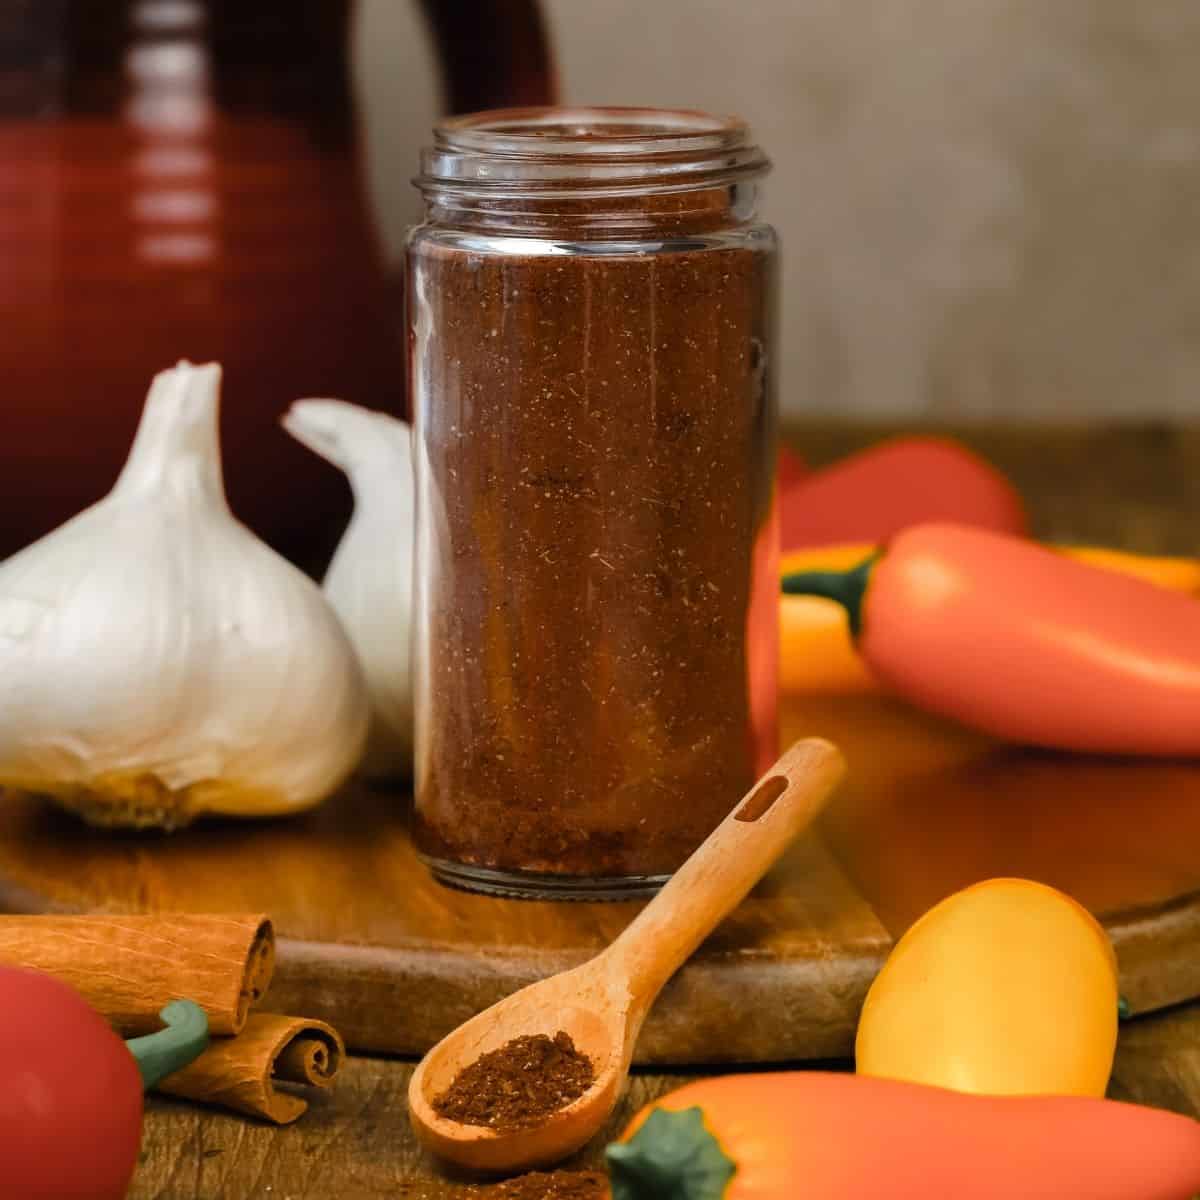 glass jar filled with homemade chili seasoning mix on the countertop next to peppers